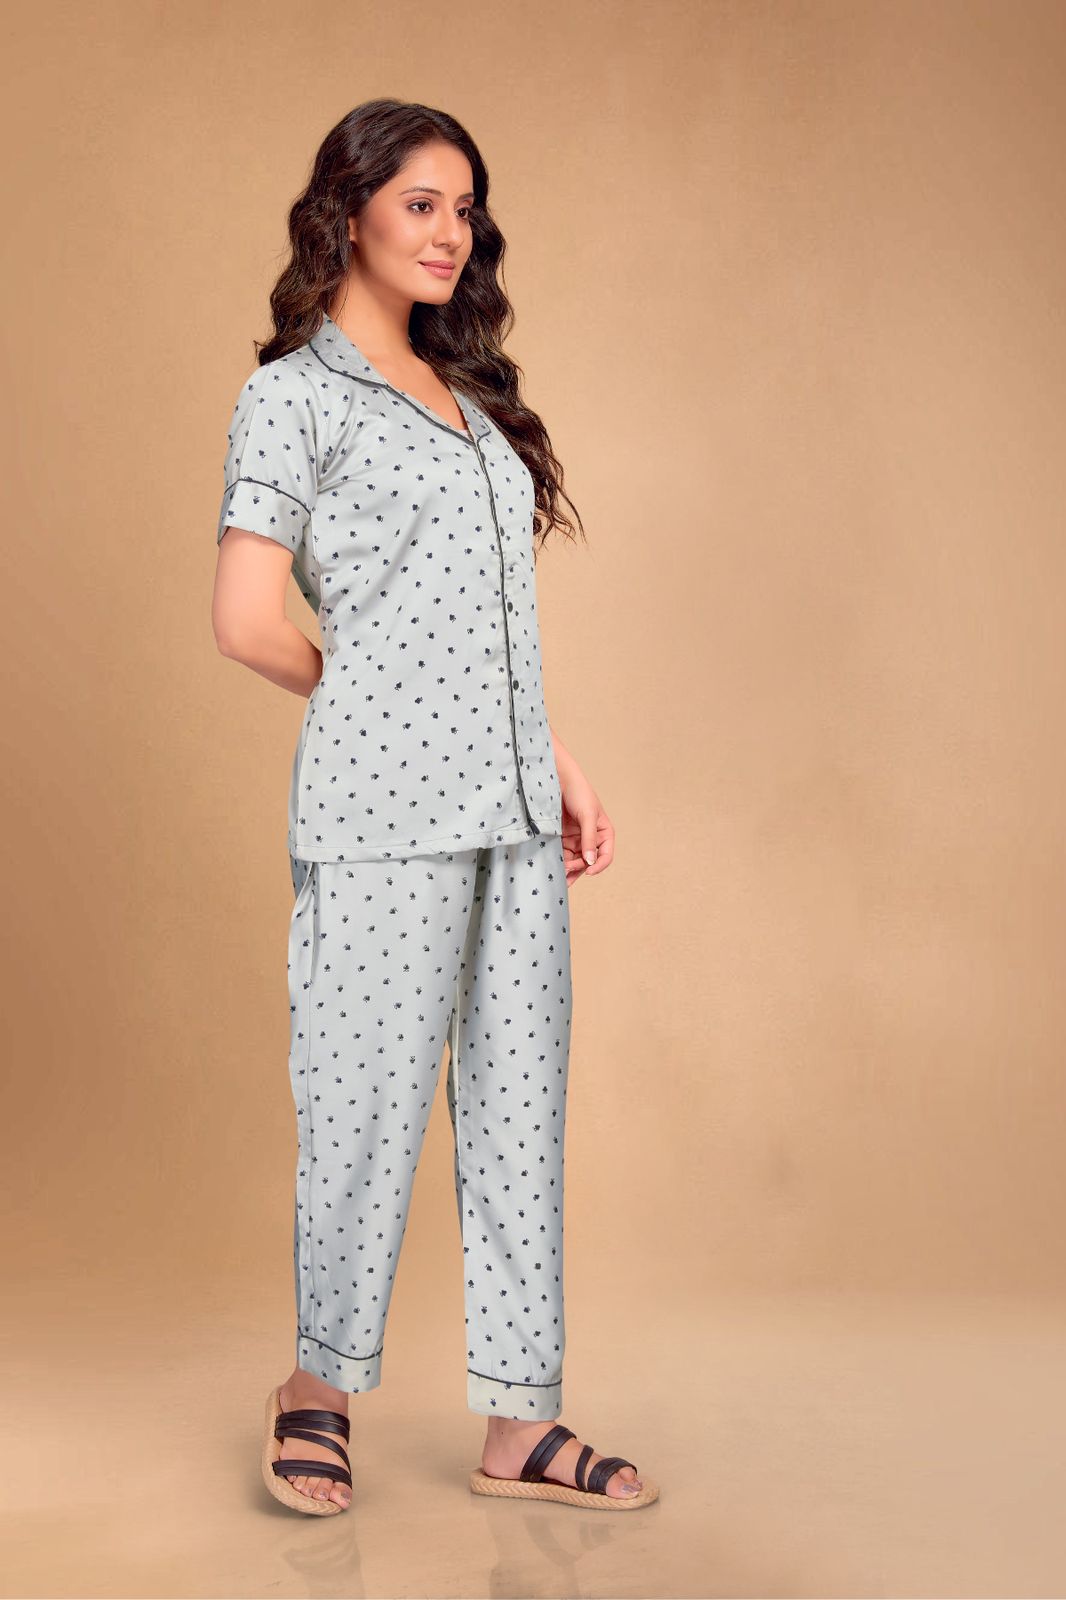 channel 9 SKU 105ND To 108ND attrective look Night Dress Top Bottom With Eye Mask size set